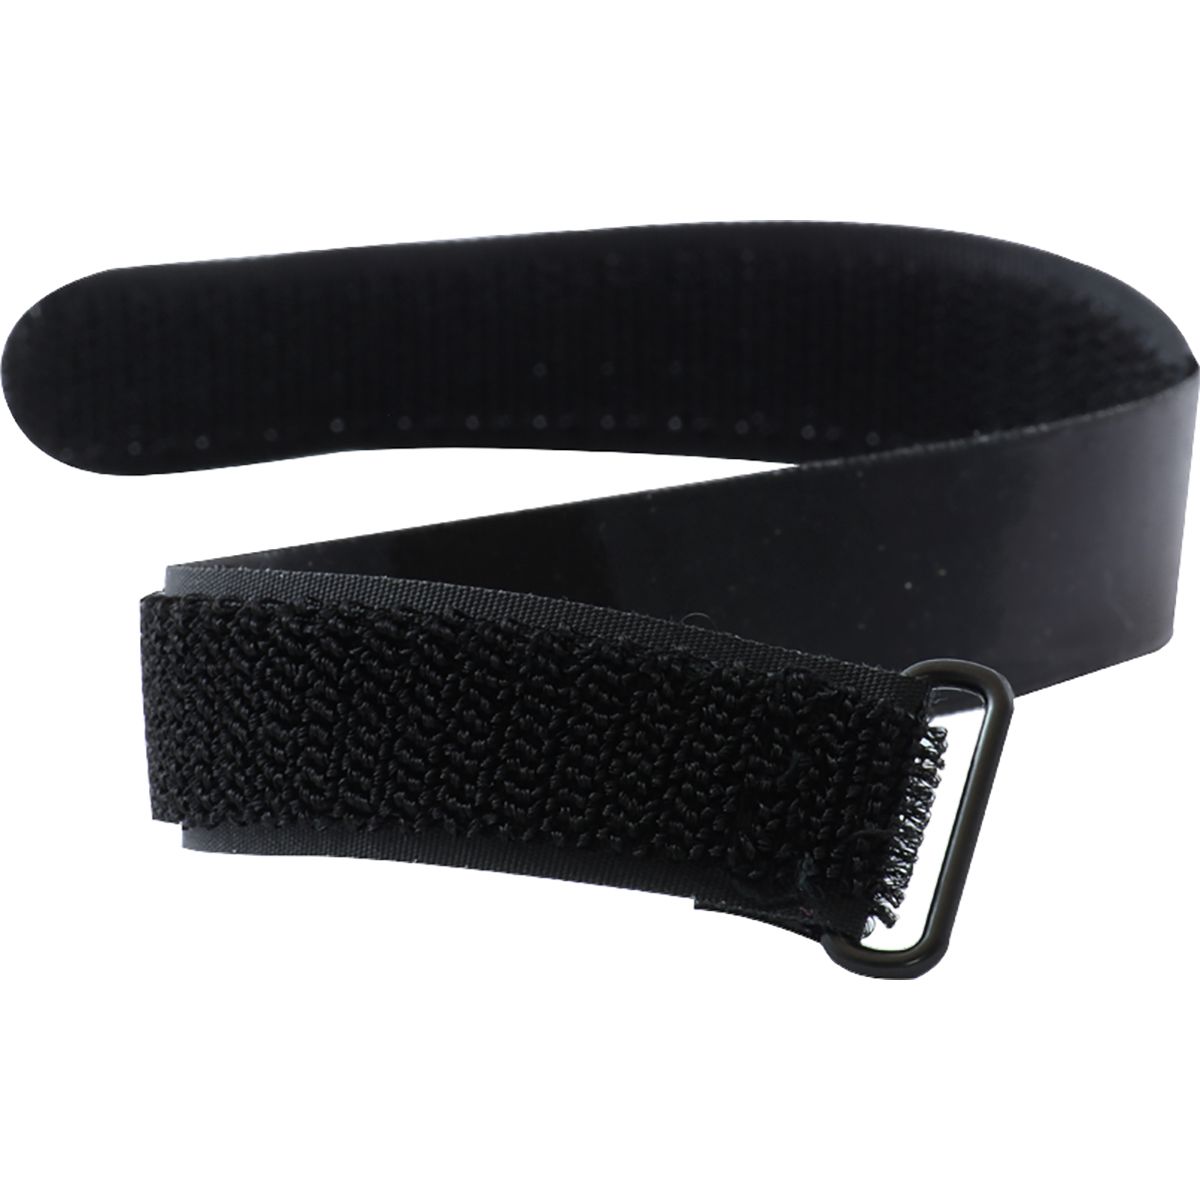 CYCLIQ Fly 6 CE Strap Pack